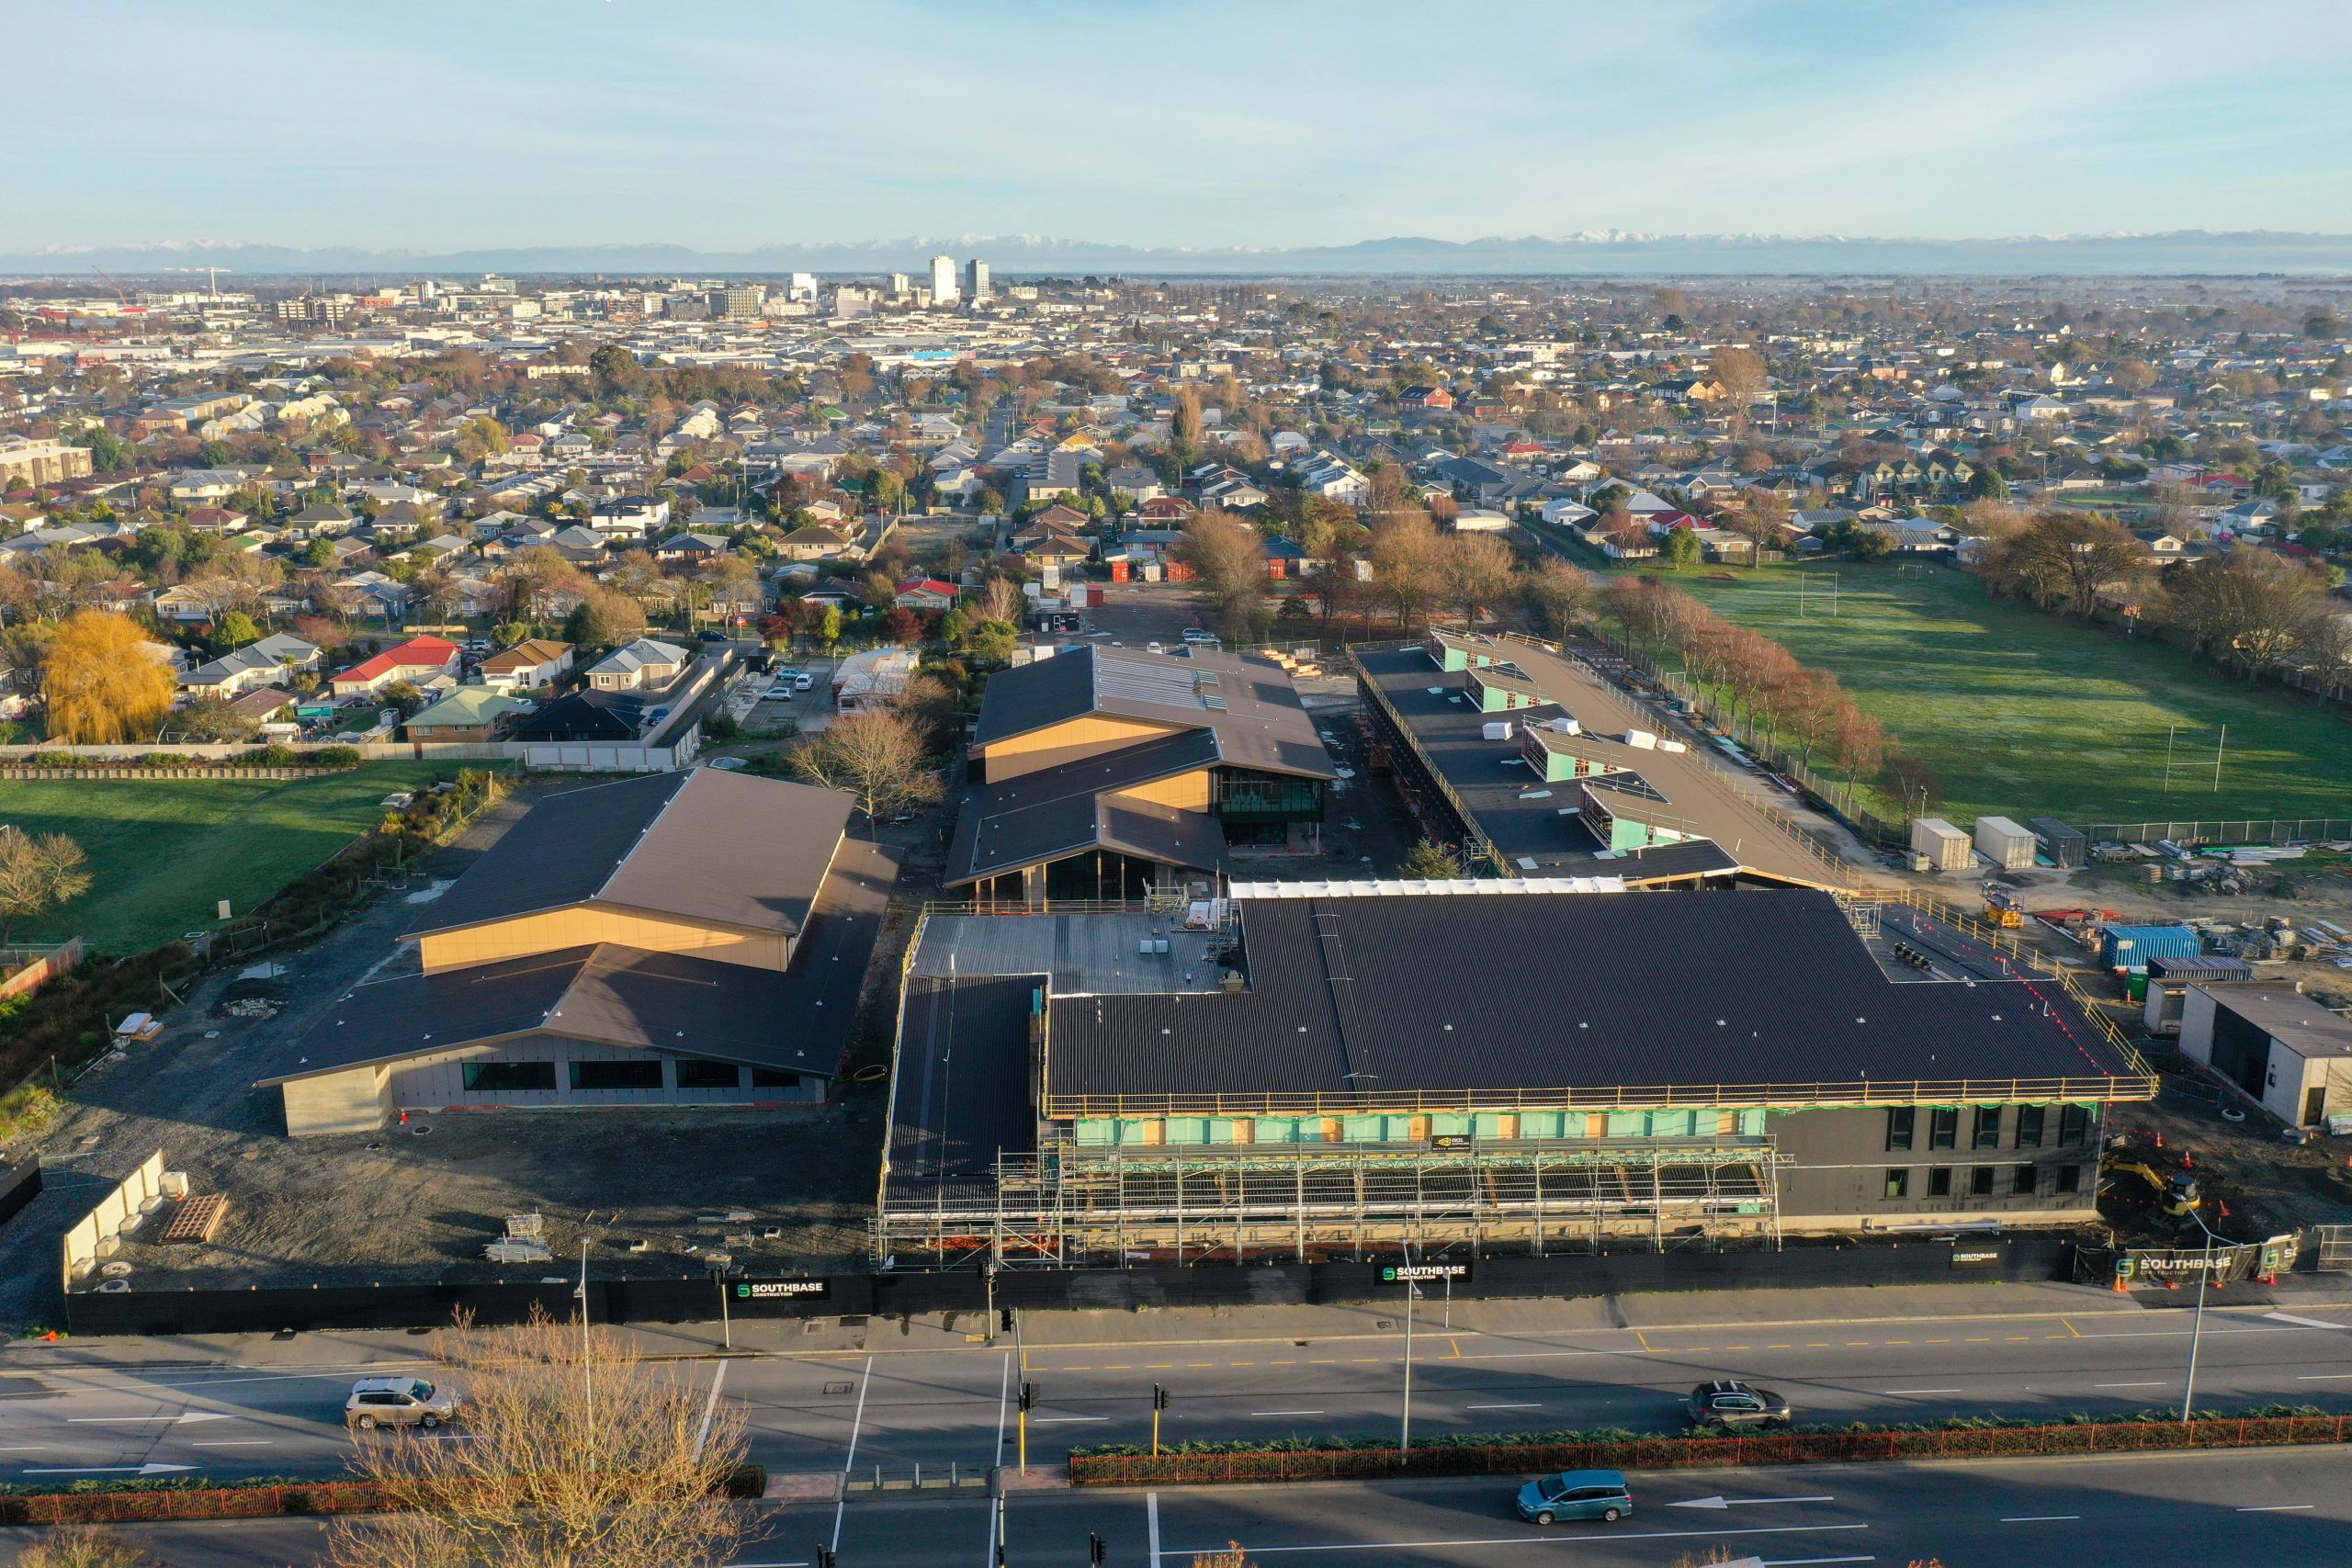 aerial photograph of Linwood College campus under construction with Christchurch city skyline in background. taken at sunrise with mountains visible